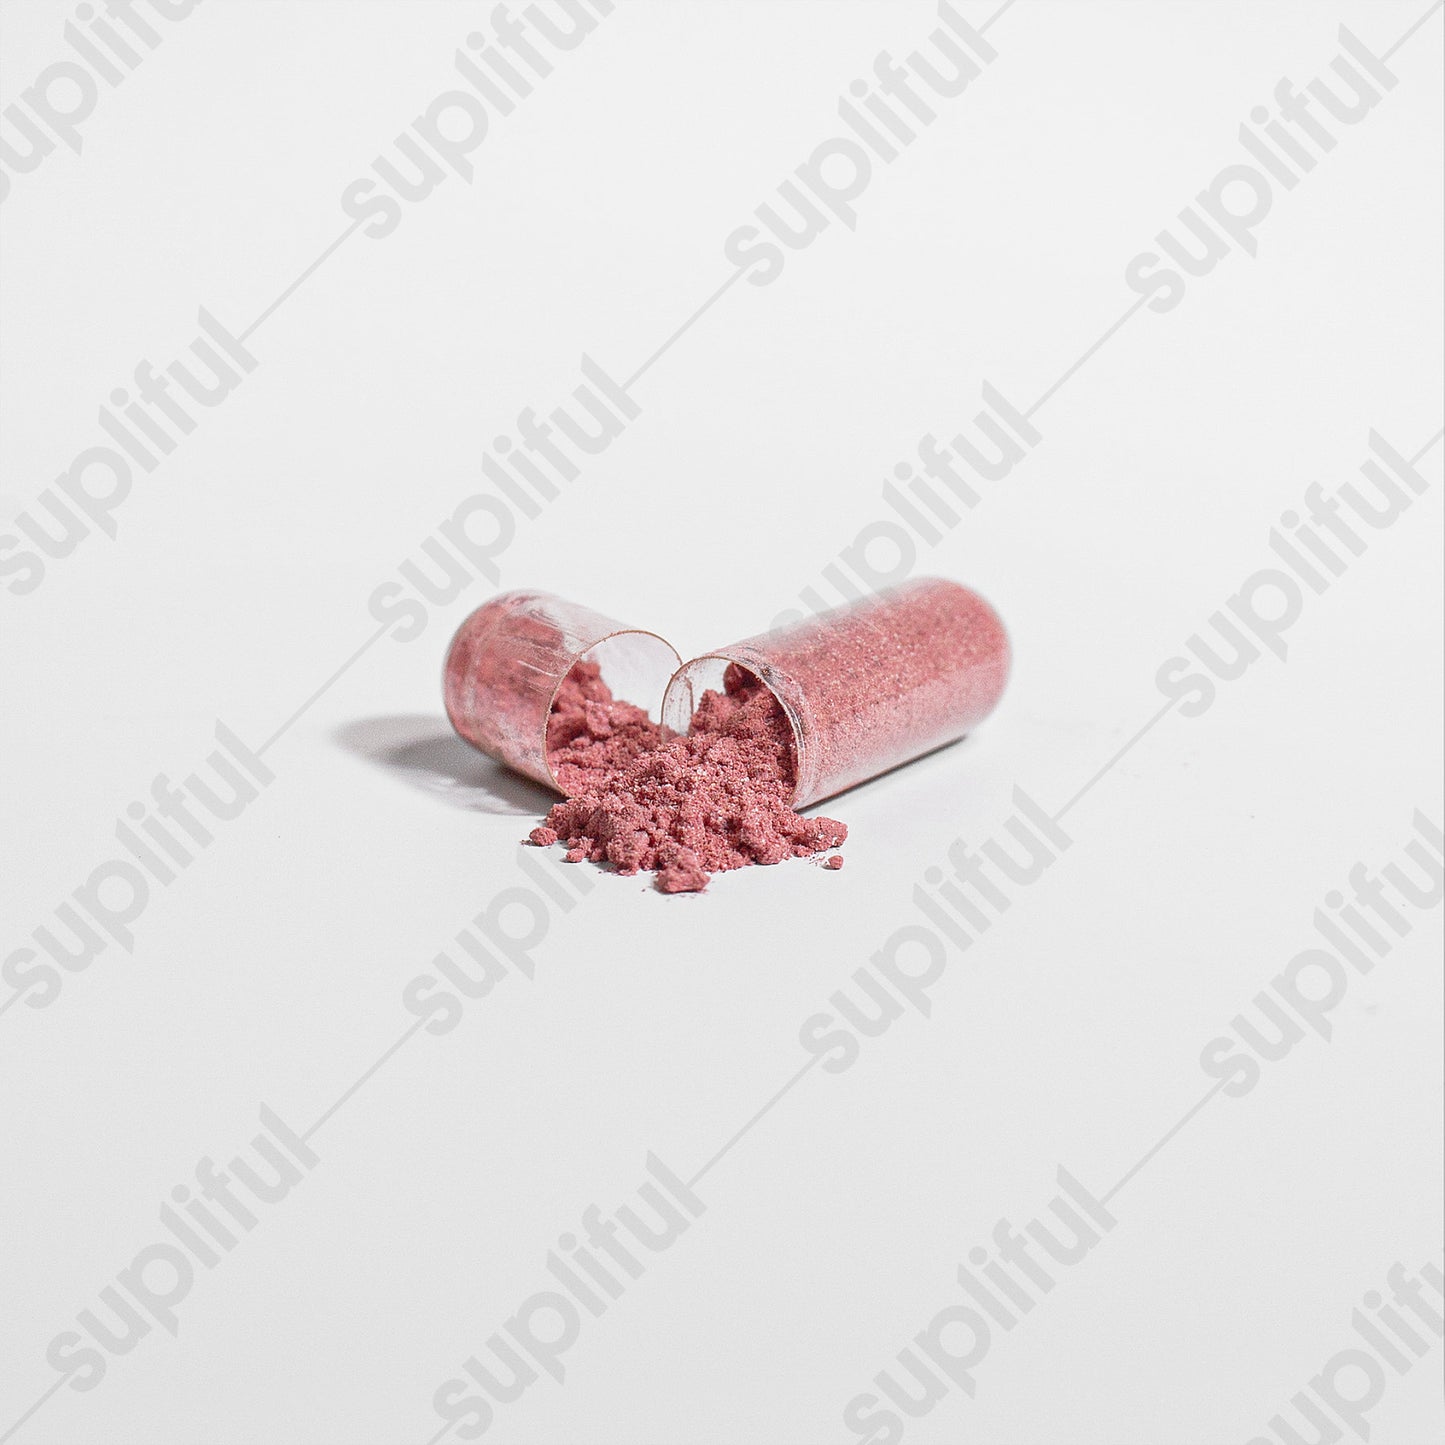 Dawg Pound Beetroot Supplement - Broken Capsules Showing Inner Powder 